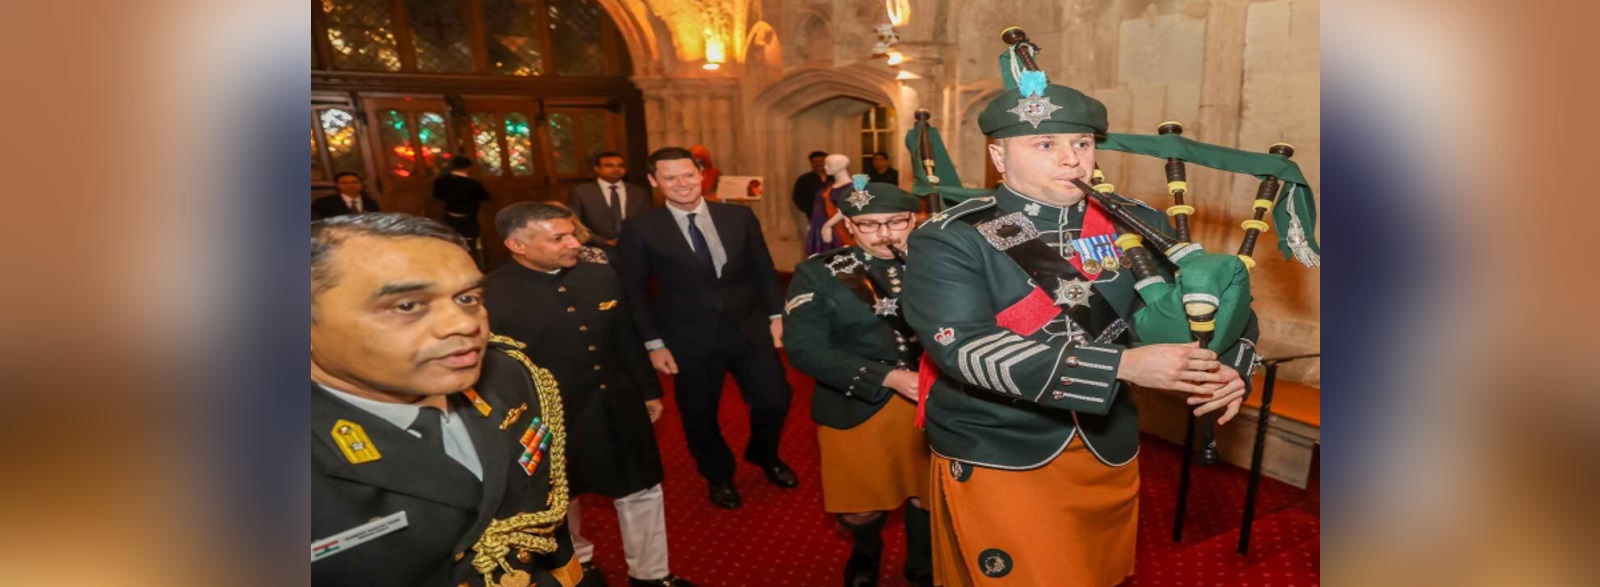 75th Republic day celebration at Guildhall, London on January 26, 2024